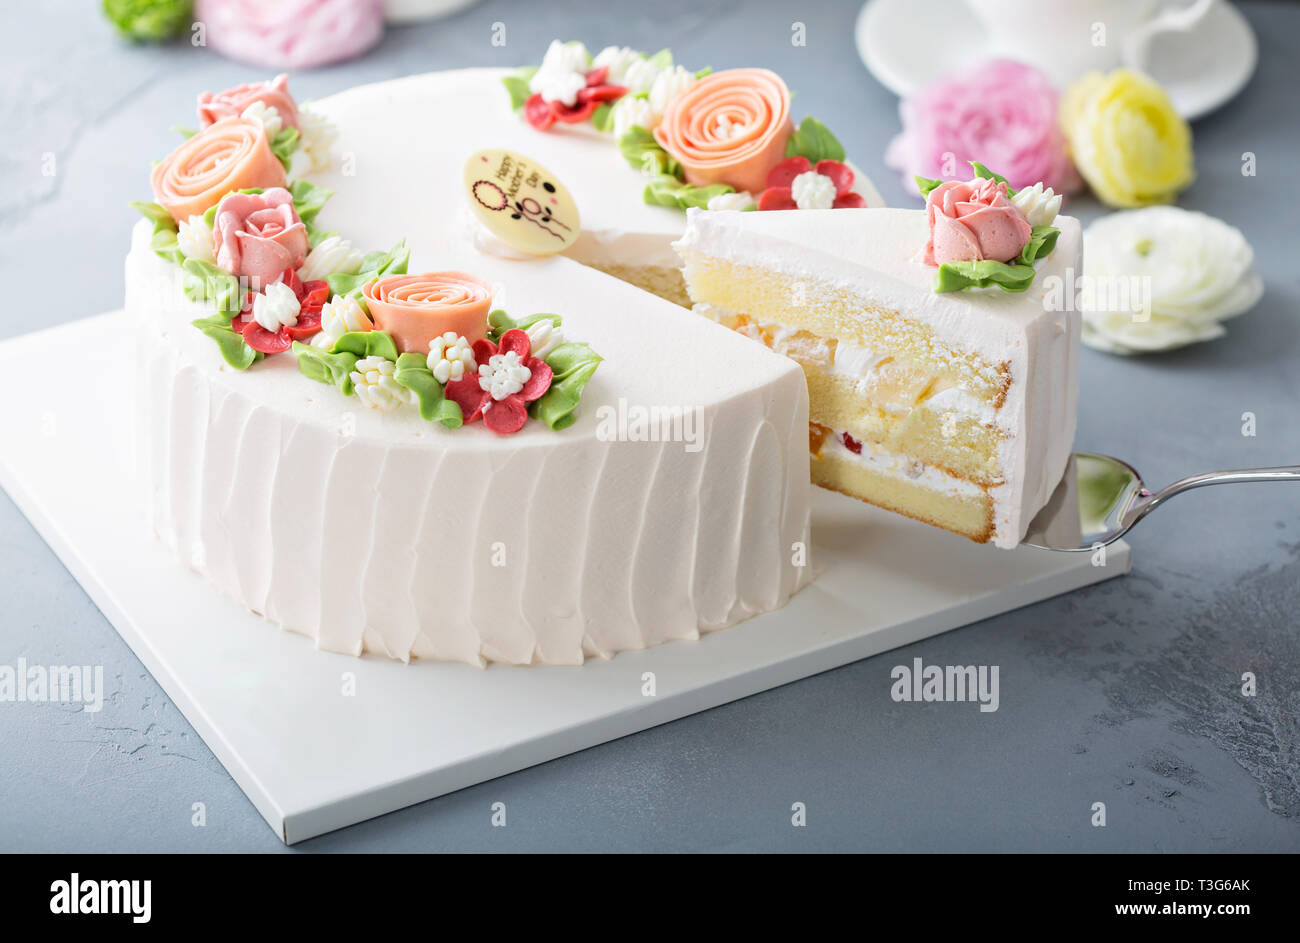 Mothers day cake with flowers Stock Photo - Alamy